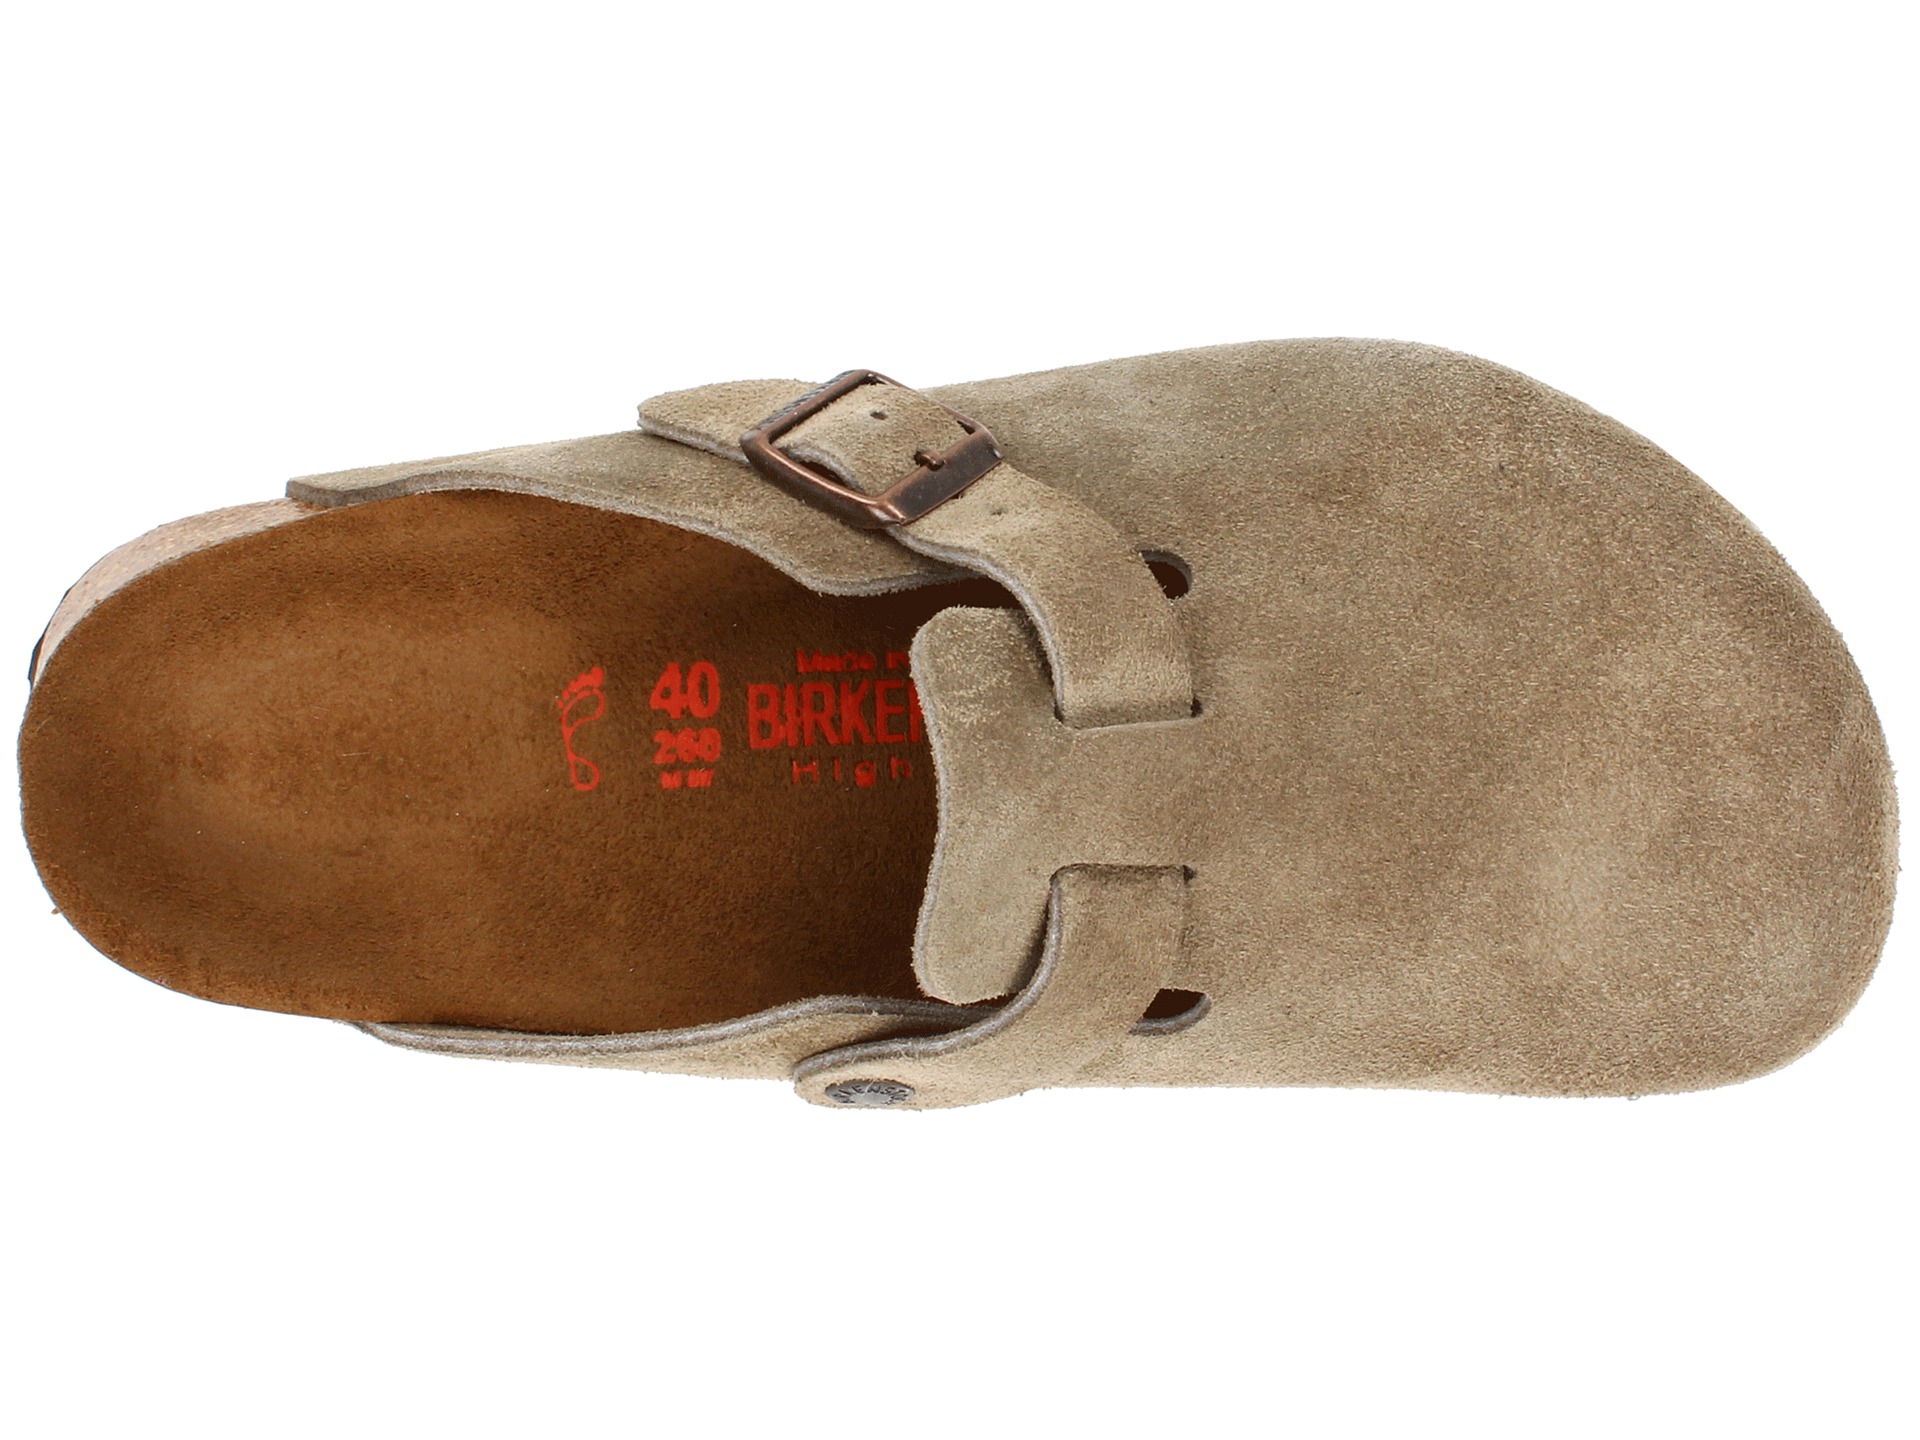 Birkenstock Boston High Arch, Shoes | Shipped Free at Zappos